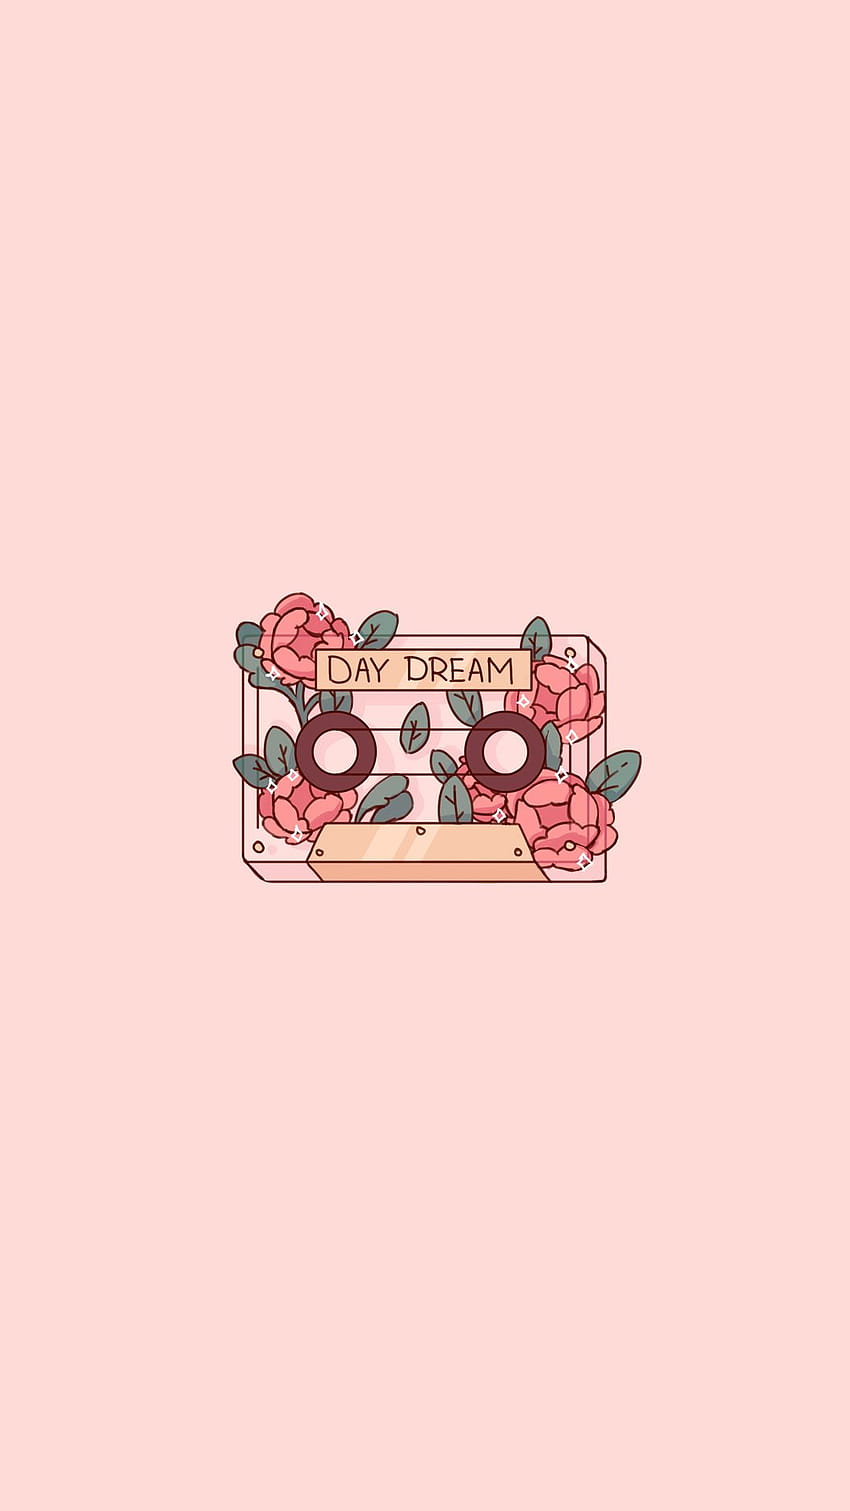 Cute Pink Romantic Day Dream Cassette Phone Doodle Drawing ...